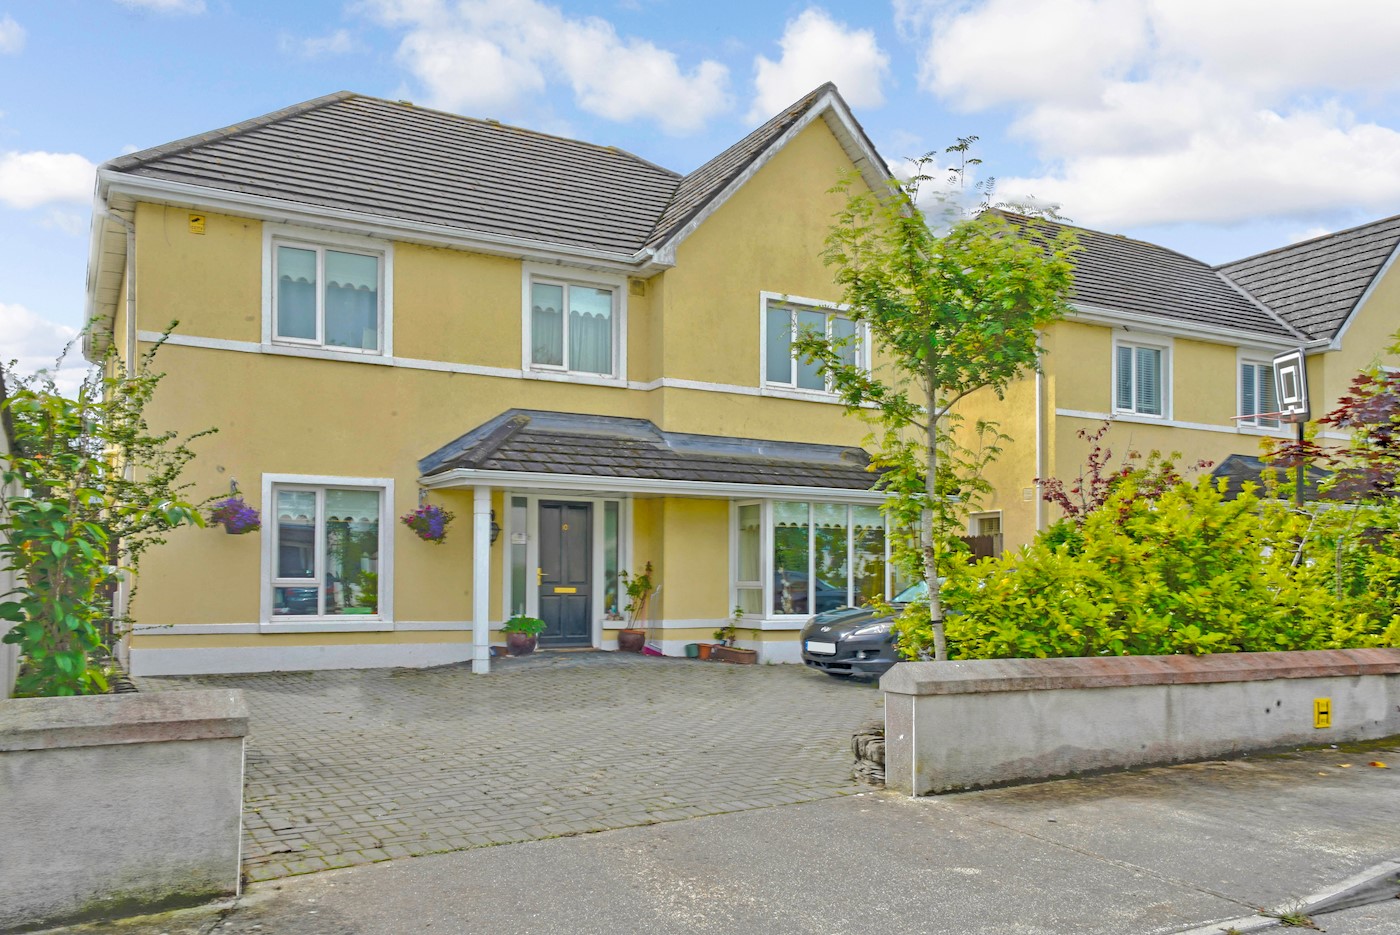 10 Weirview Hill, Castlecomer Road, Co. Kilkenny, R95 P9P8 1/14